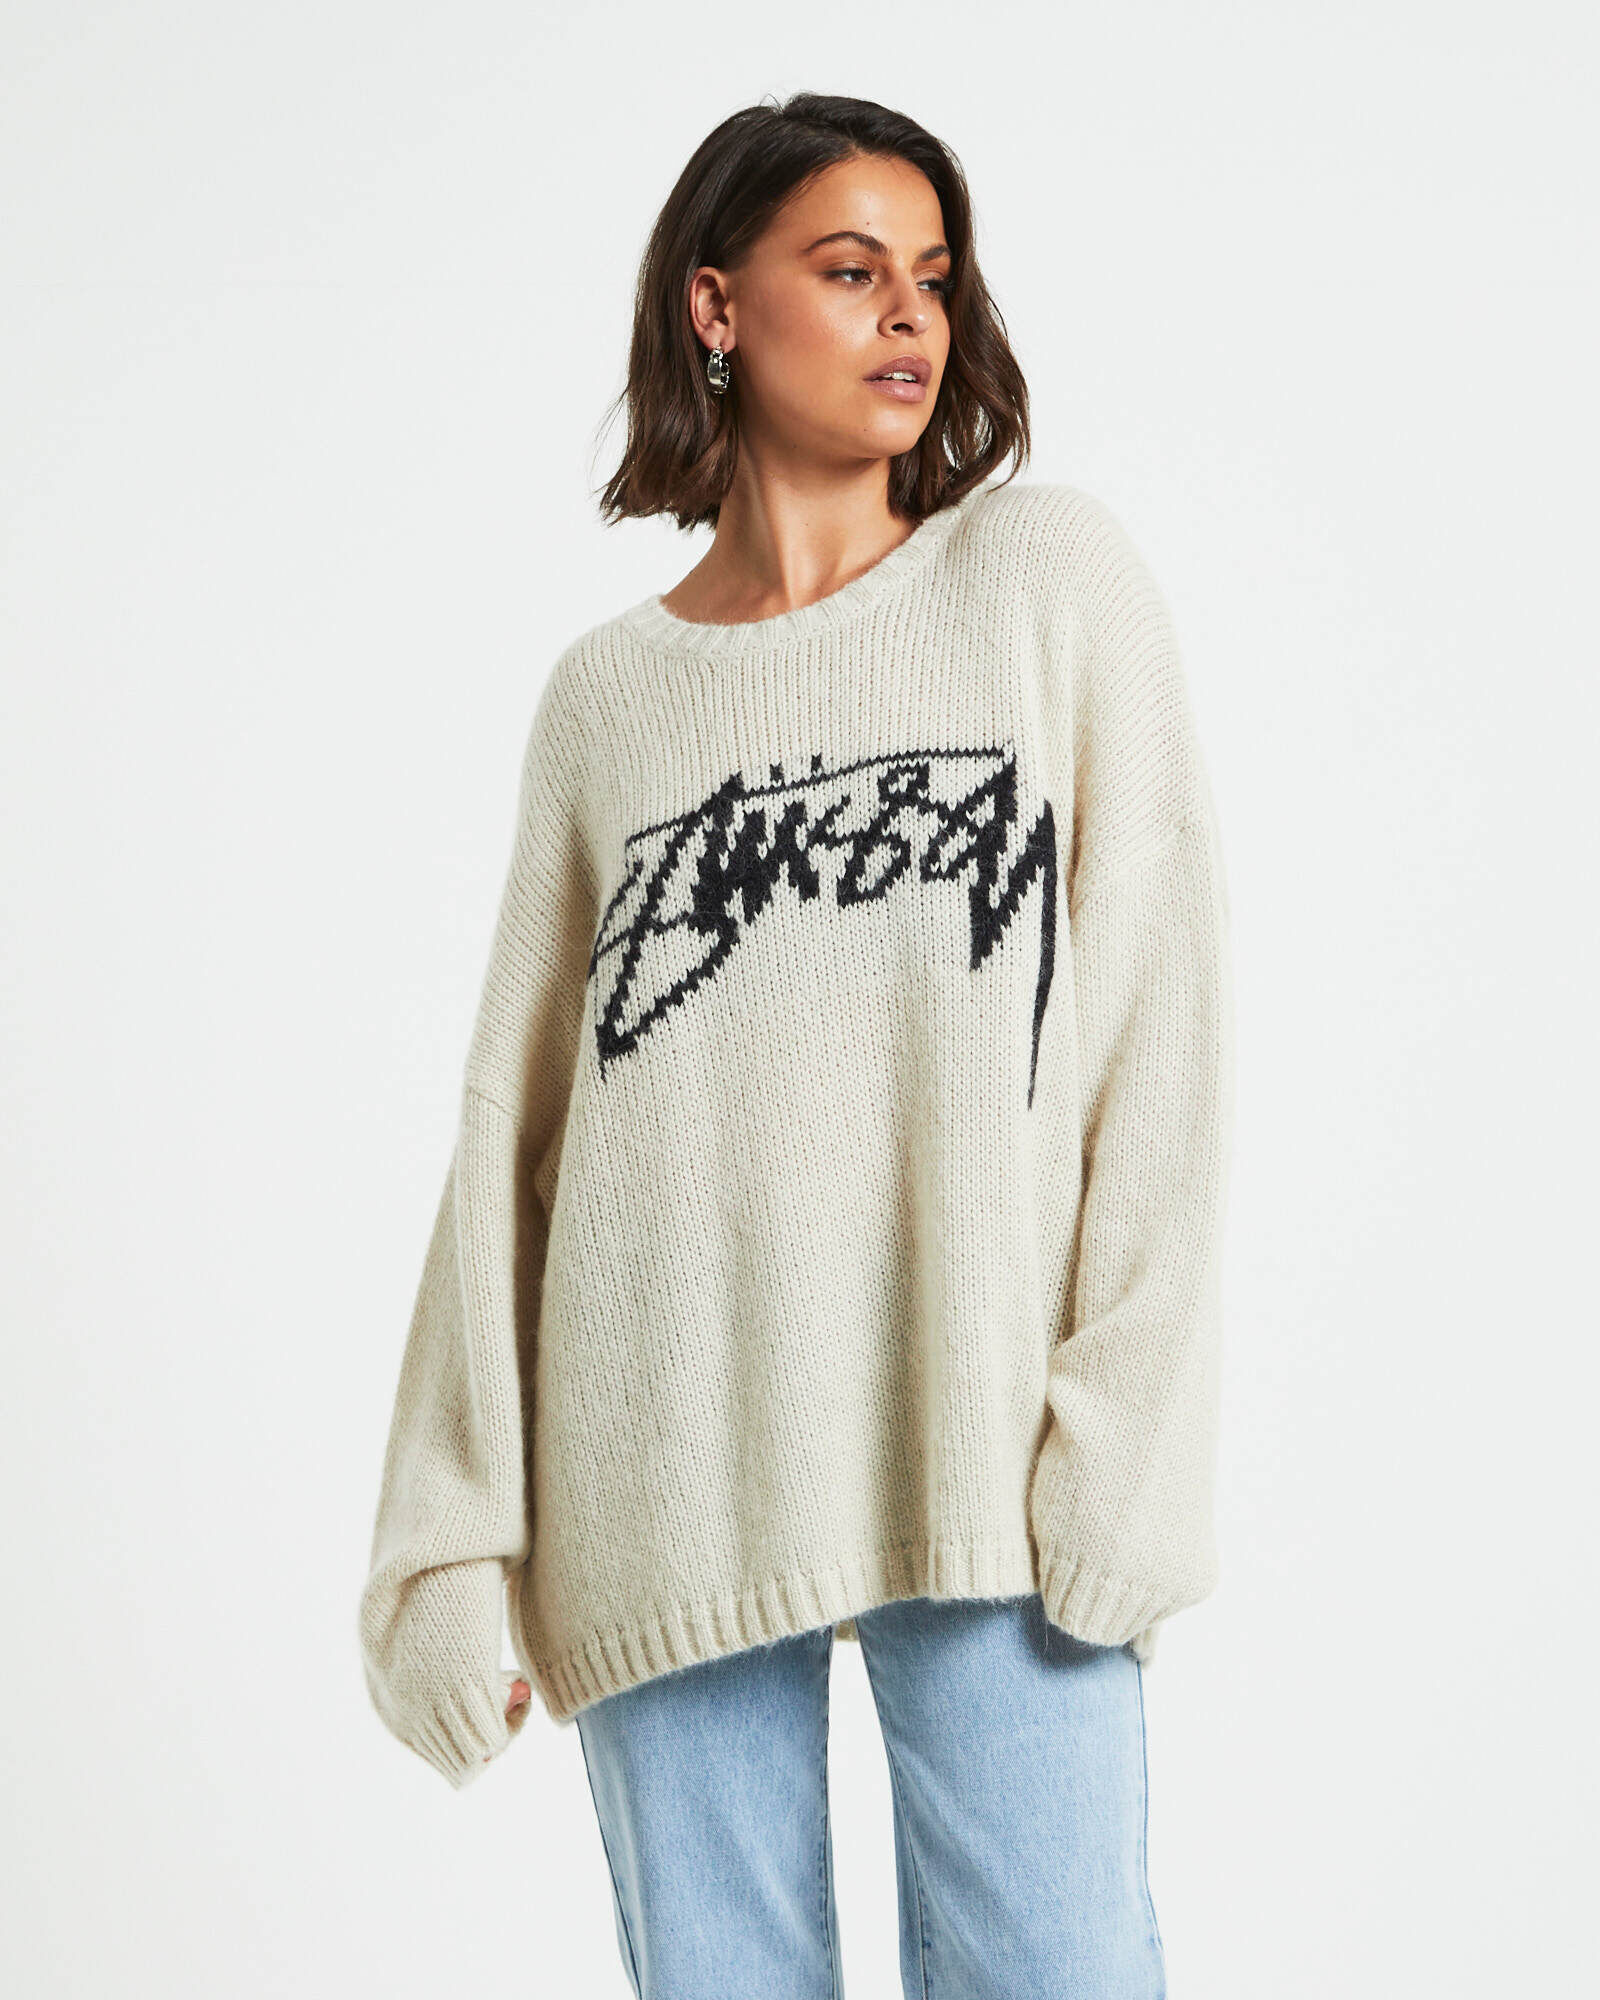 STUSSY Snooth Stock Oversized Long Sleeve Knit Sweater in Cream